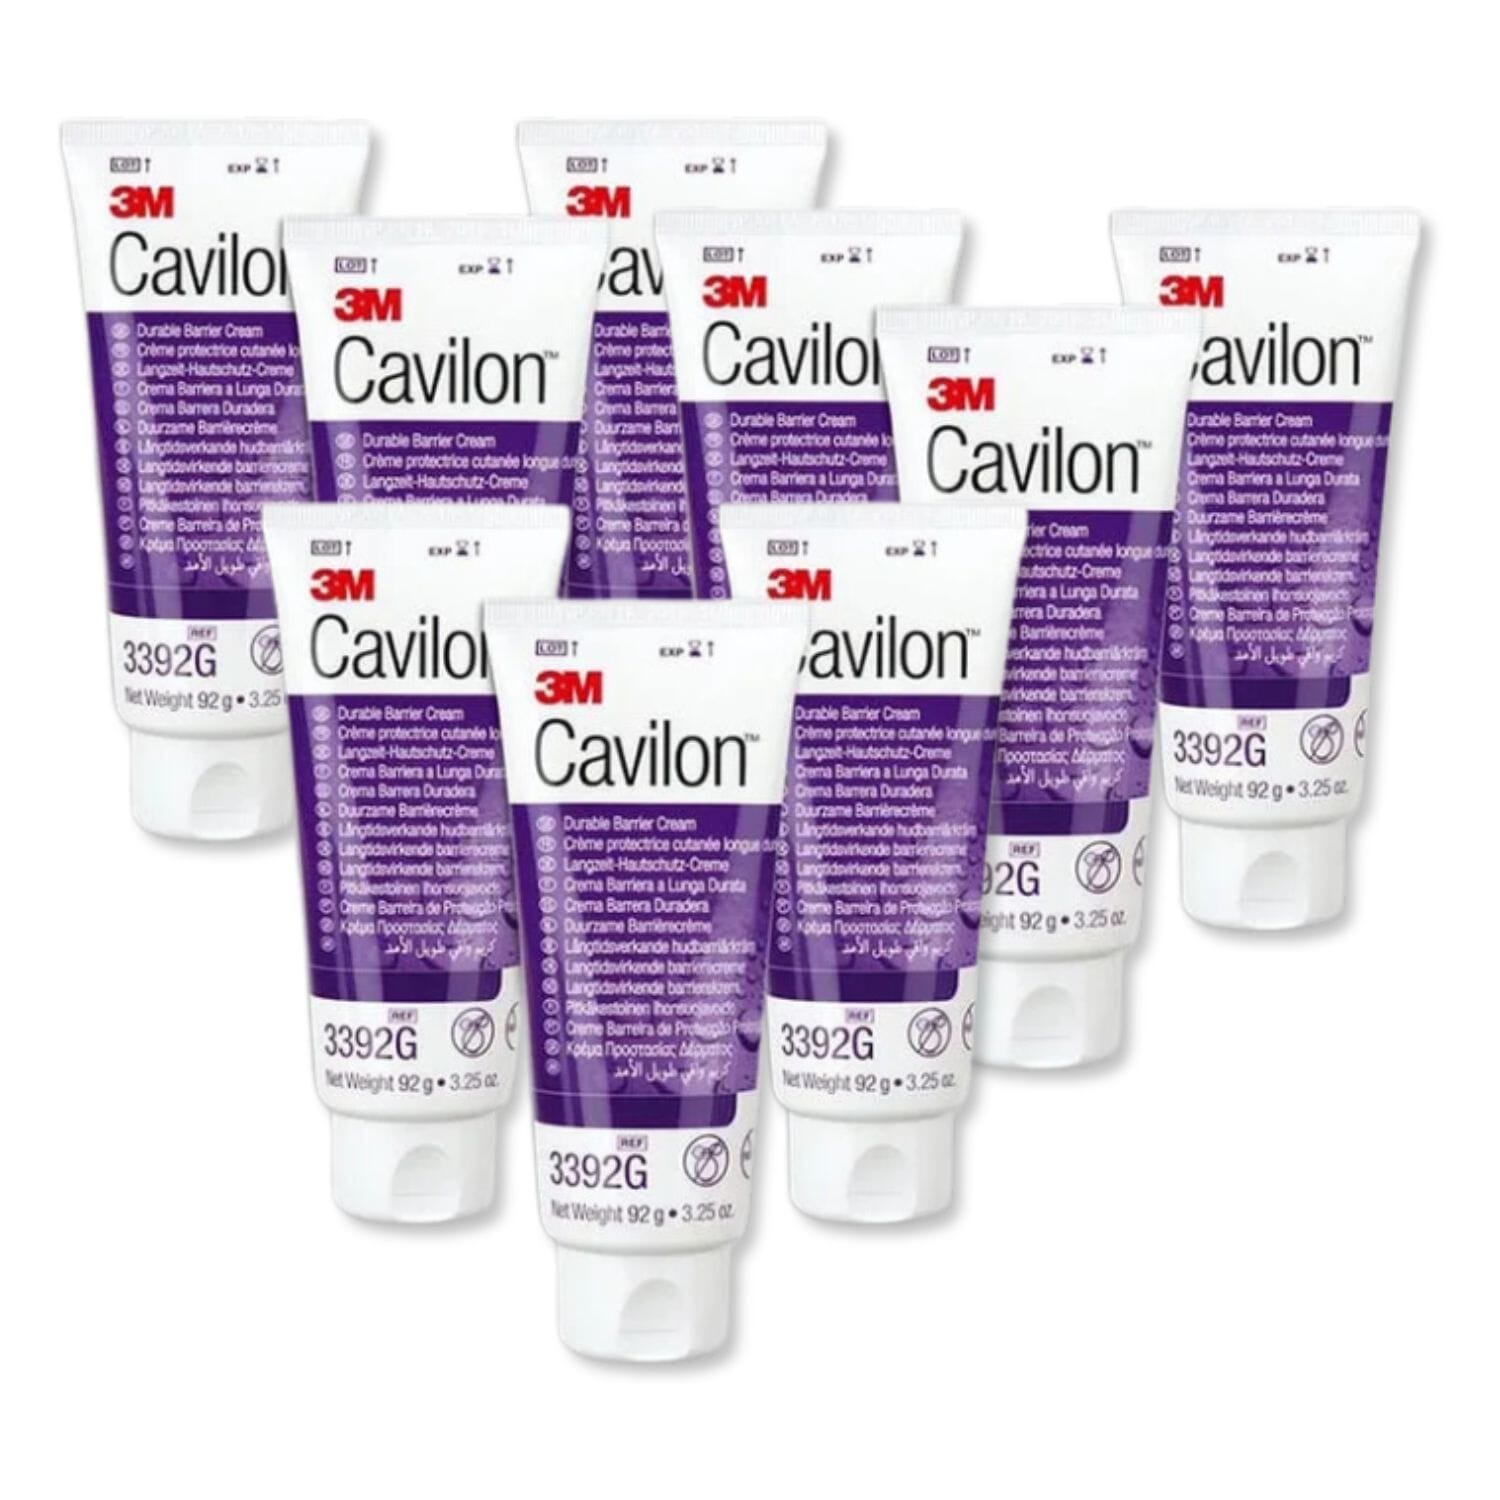 View Cavillion Durable Barrier Cream Multi Pack 92g Tube Pack of 12 information